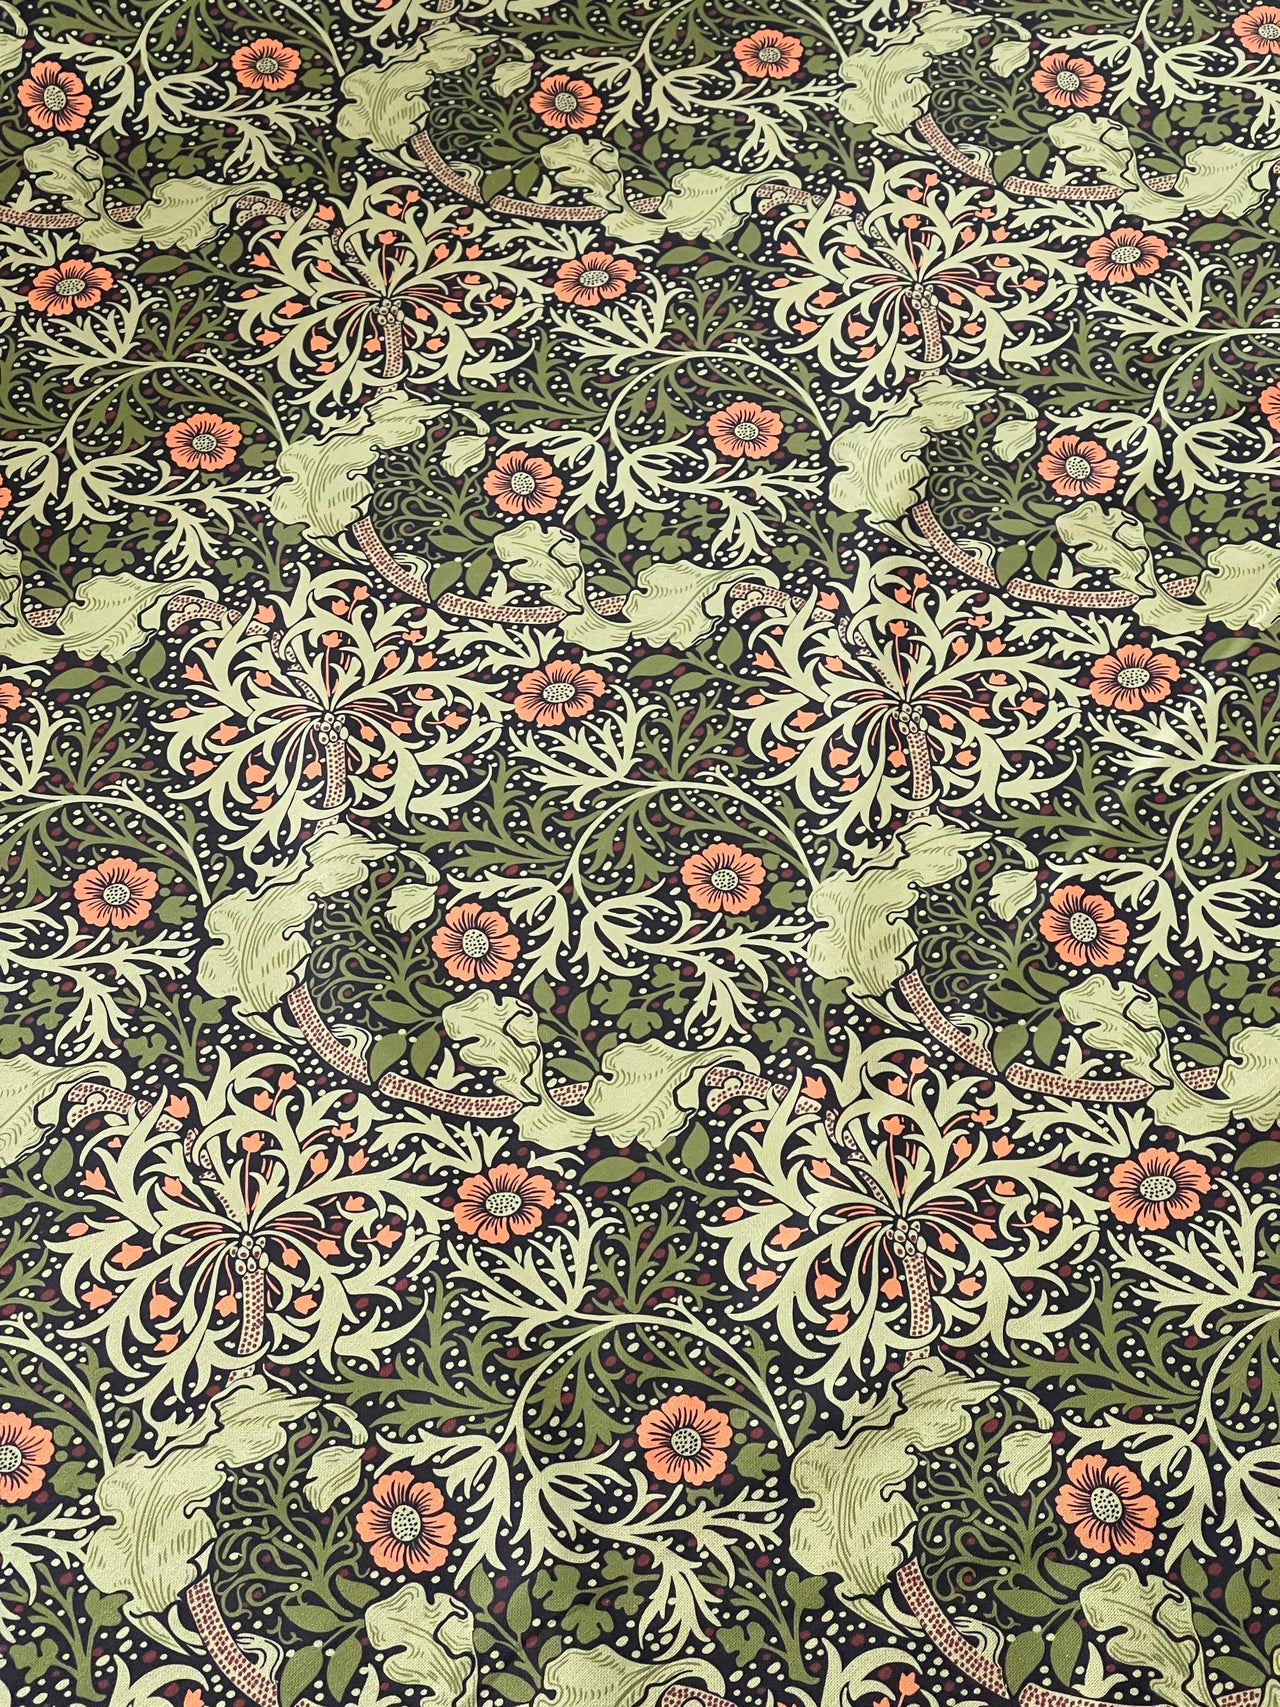 William Morris Seaweed Printed Cotton Fabric - Green and Orange - Sold by the Meter